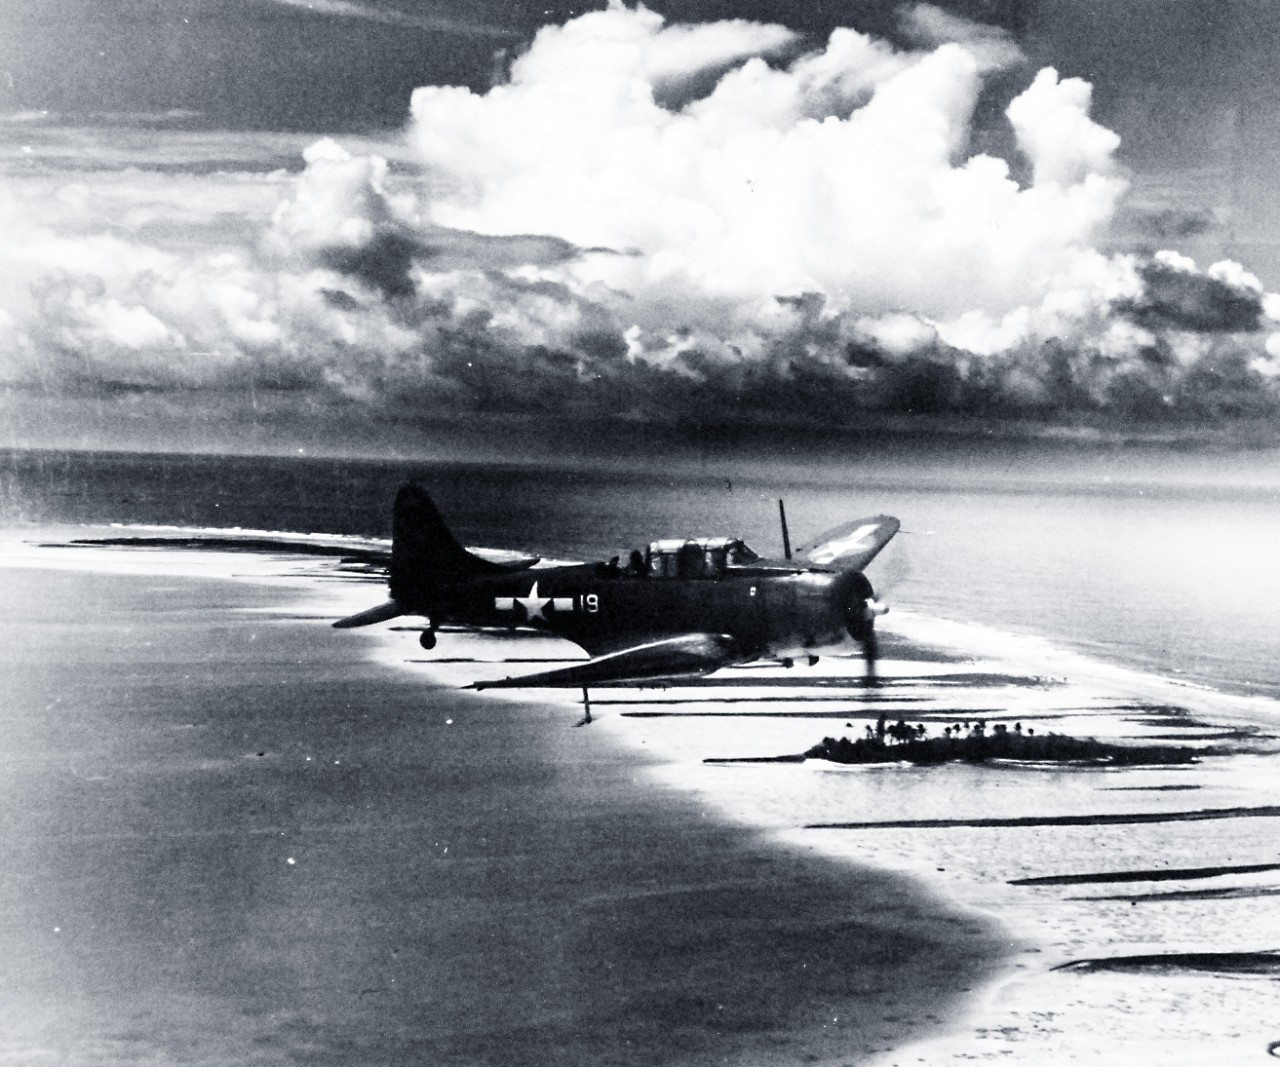 80-G-234786:  SBD-5 over Majuro Atoll, 1944.   Aircraft was from USS Lexington (CV-16).    Photograph released May 13, 1944.    Official U.S. Navy photograph, now in the collections of the National Archives.  (2016/11/15).